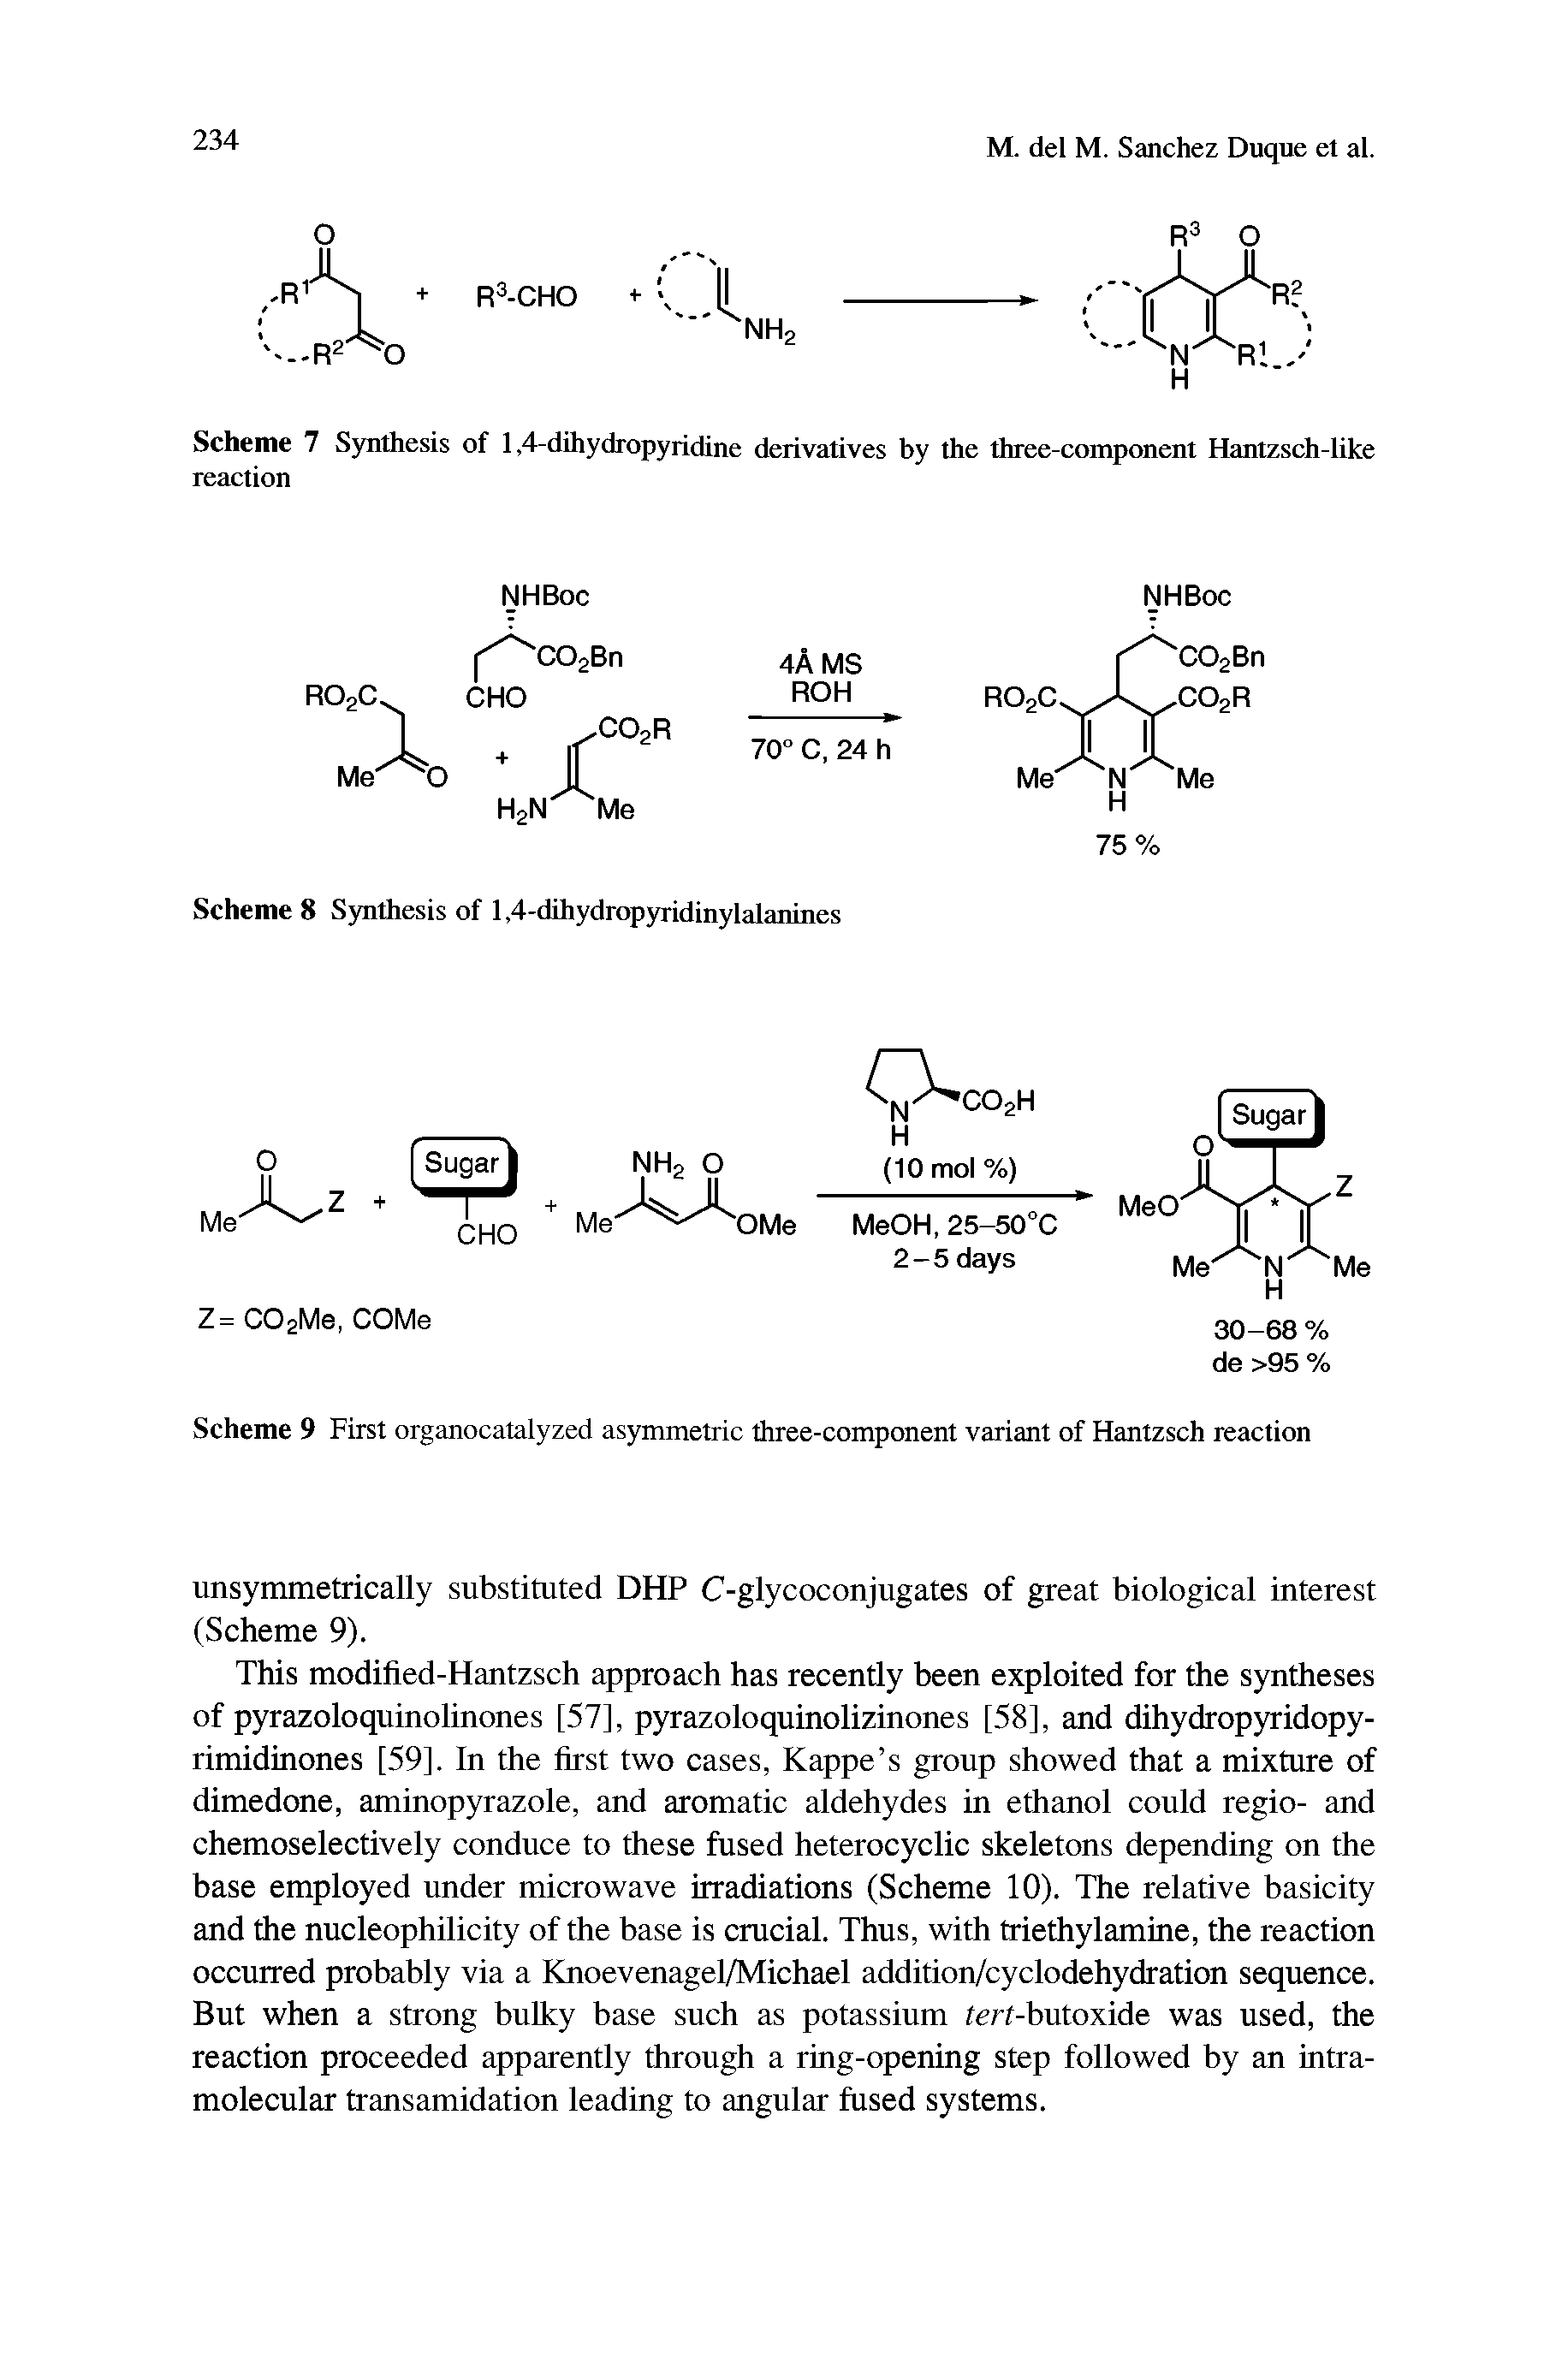 Scheme 7 Synthesis of 1,4-dihydropyricline derivatives by the three-component Hantzsch-like reaction...